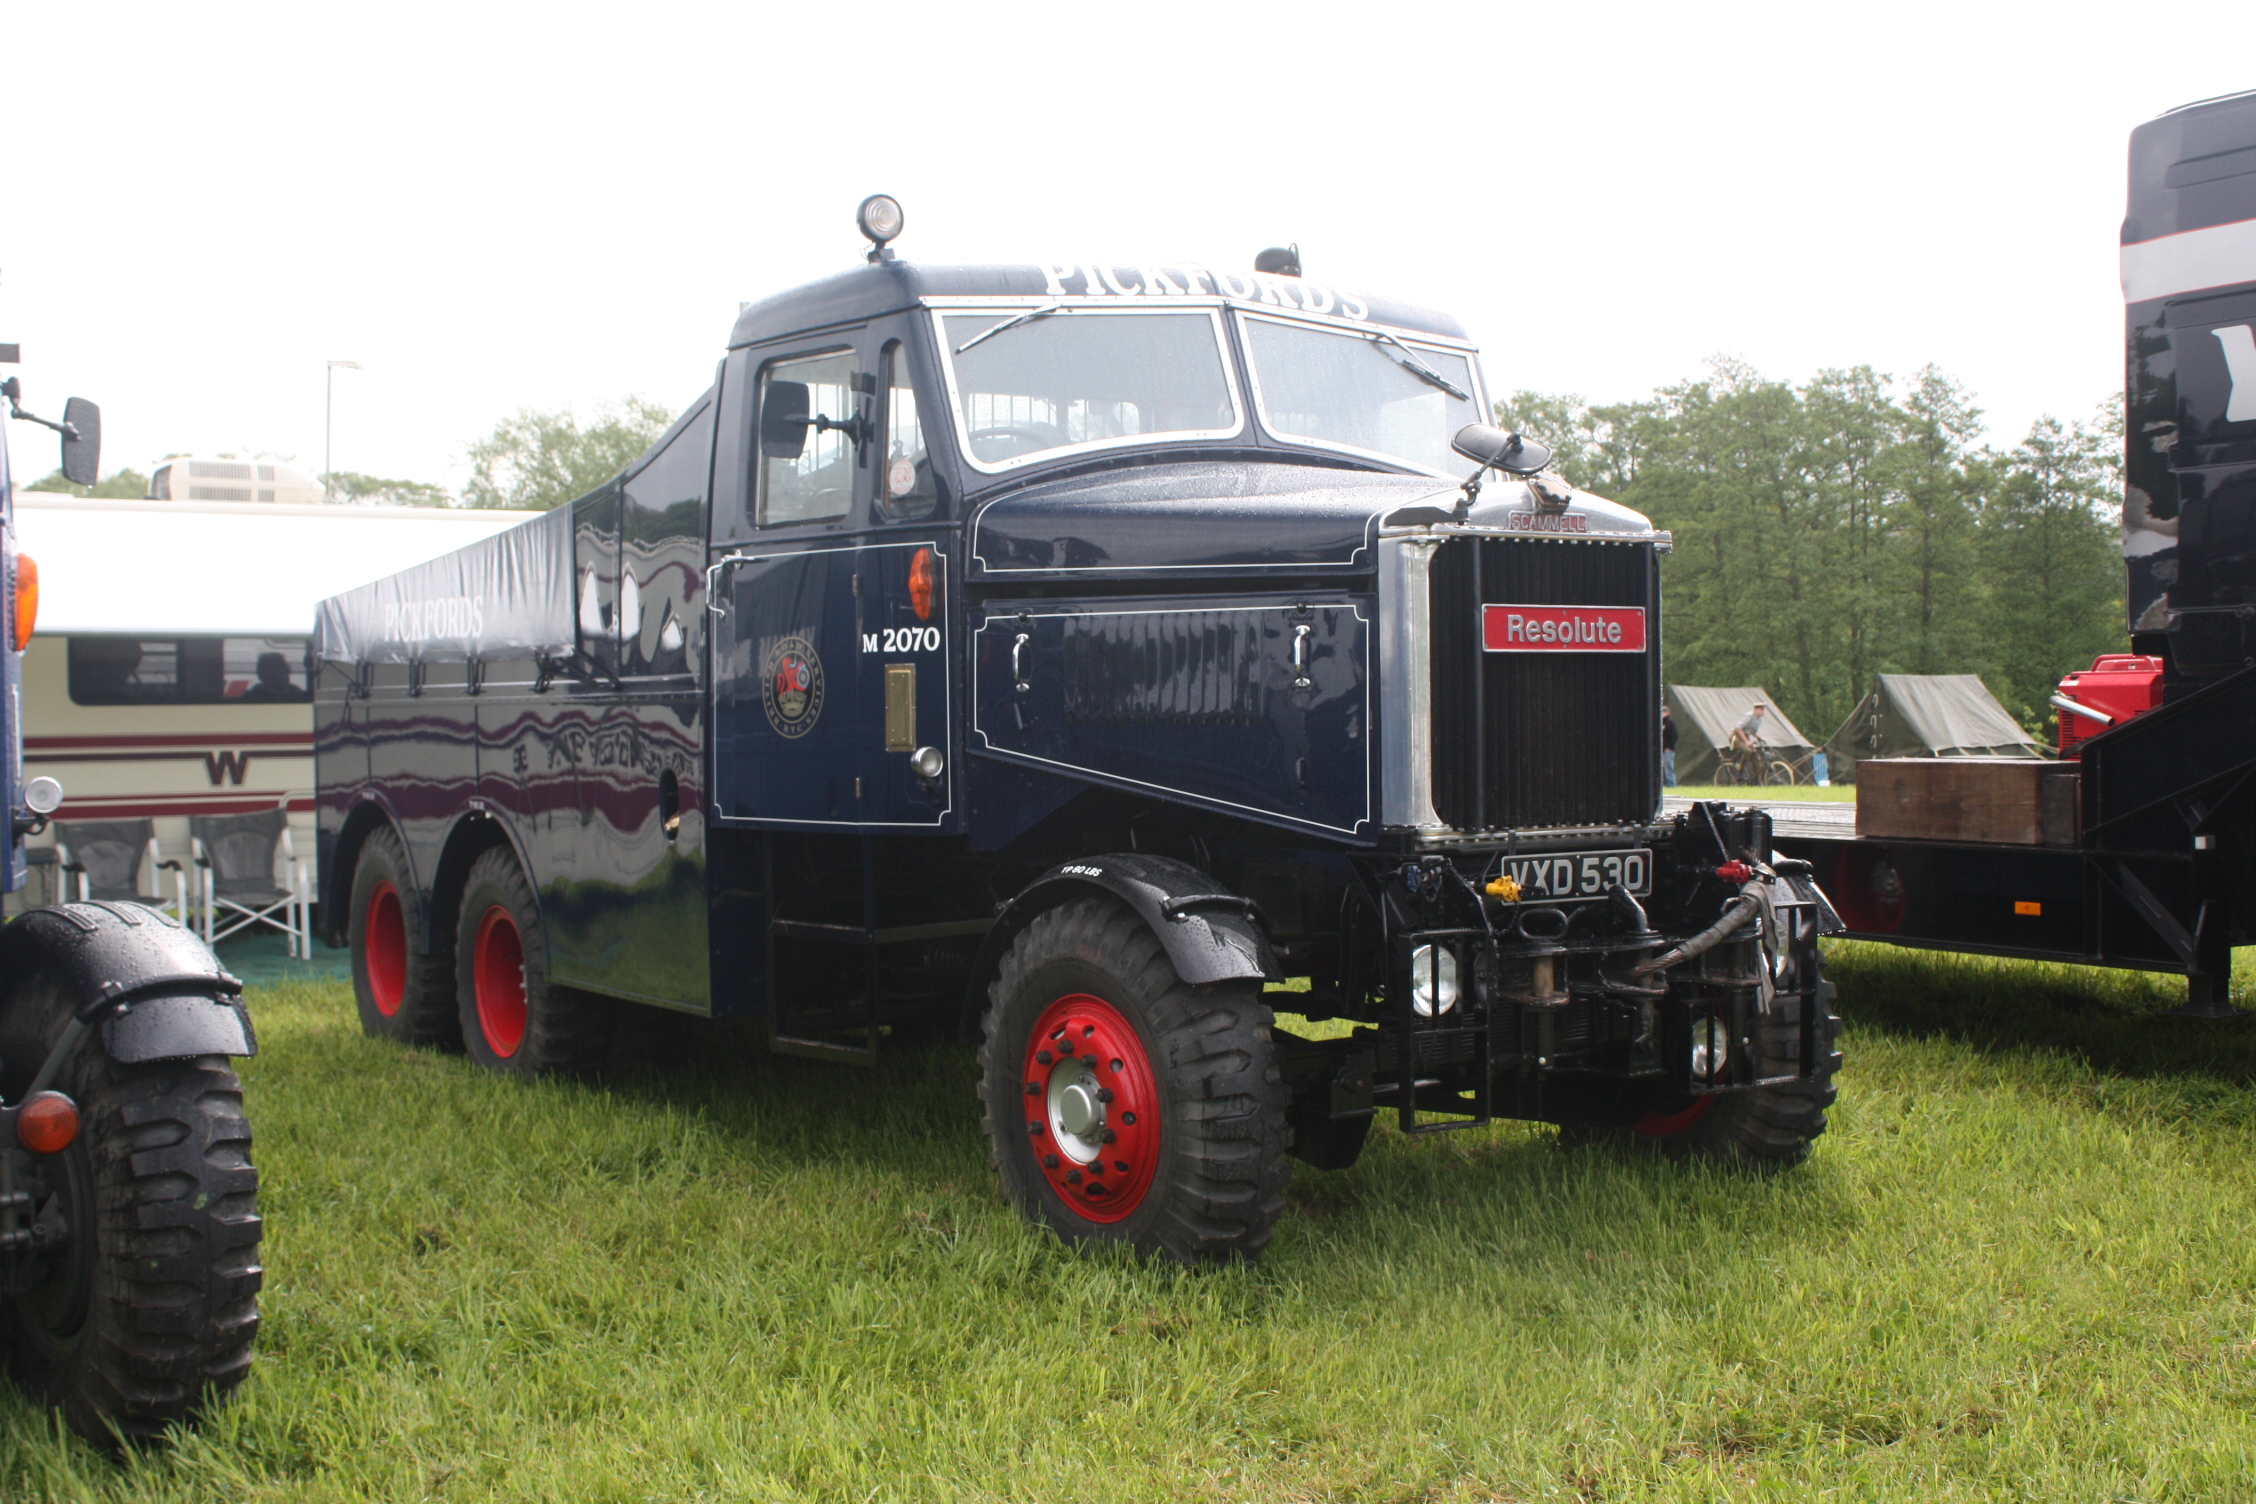 Scammell constructor